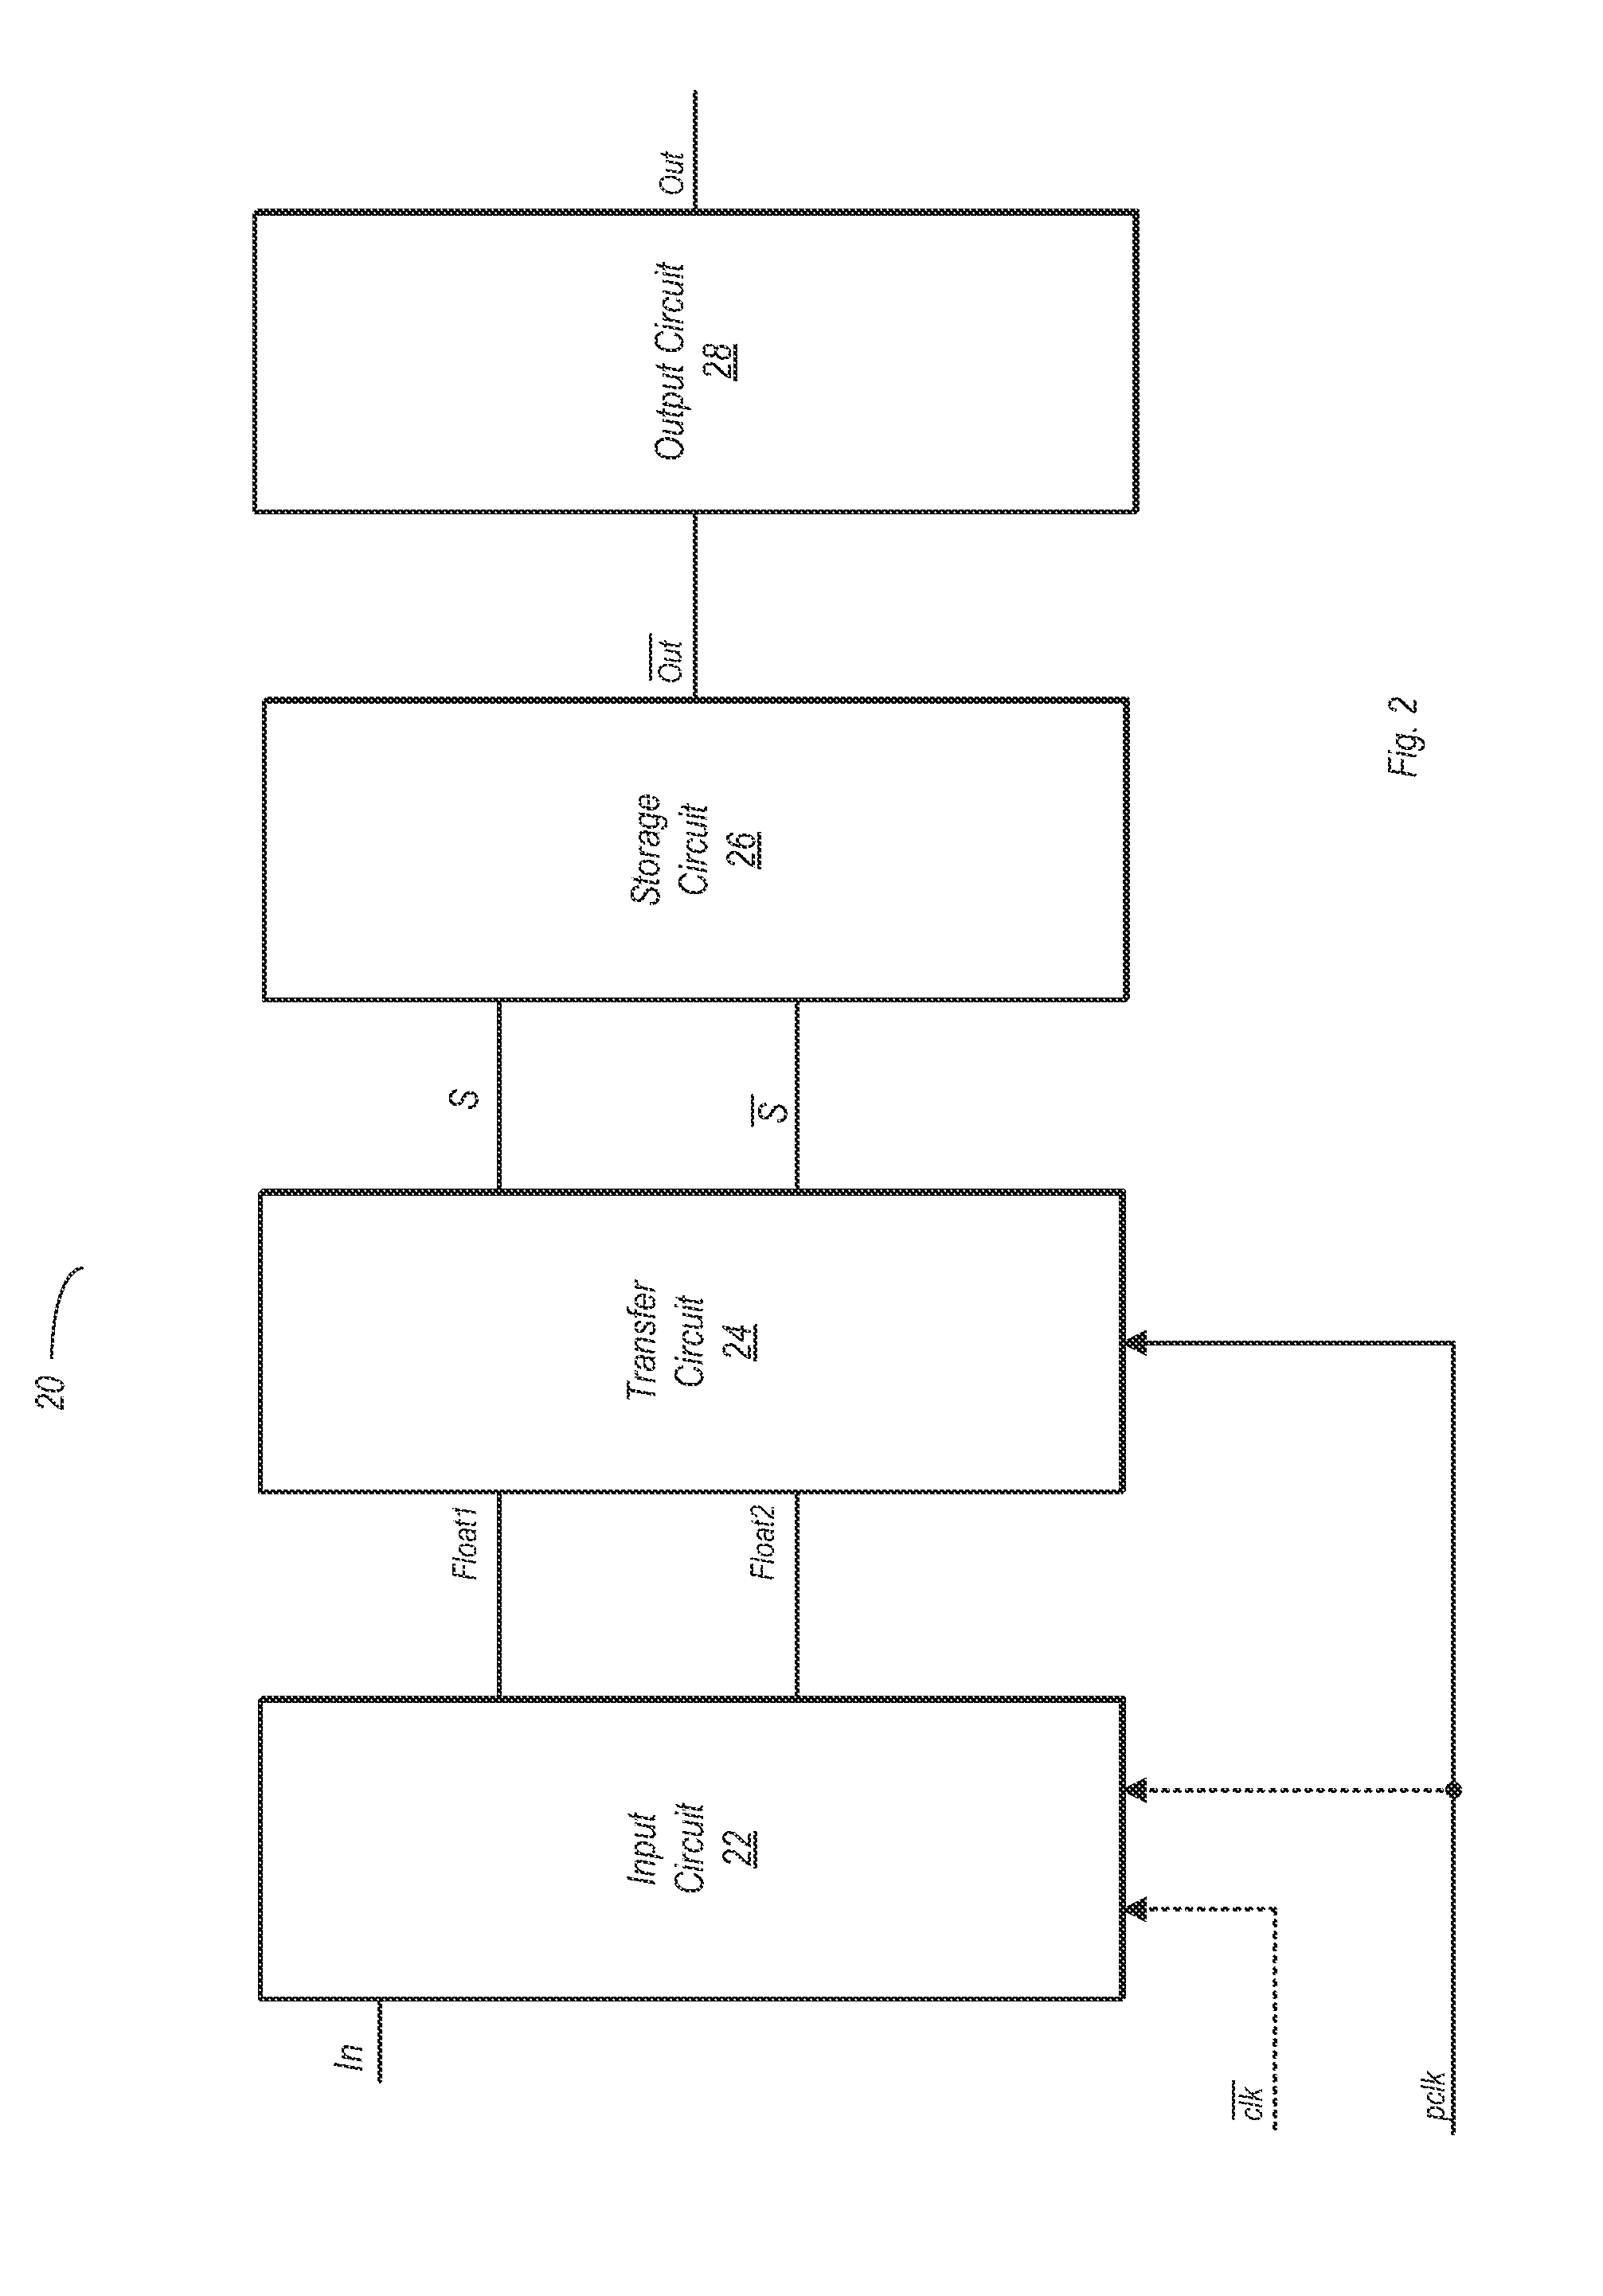 Flop type selection for very large scale integrated circuits